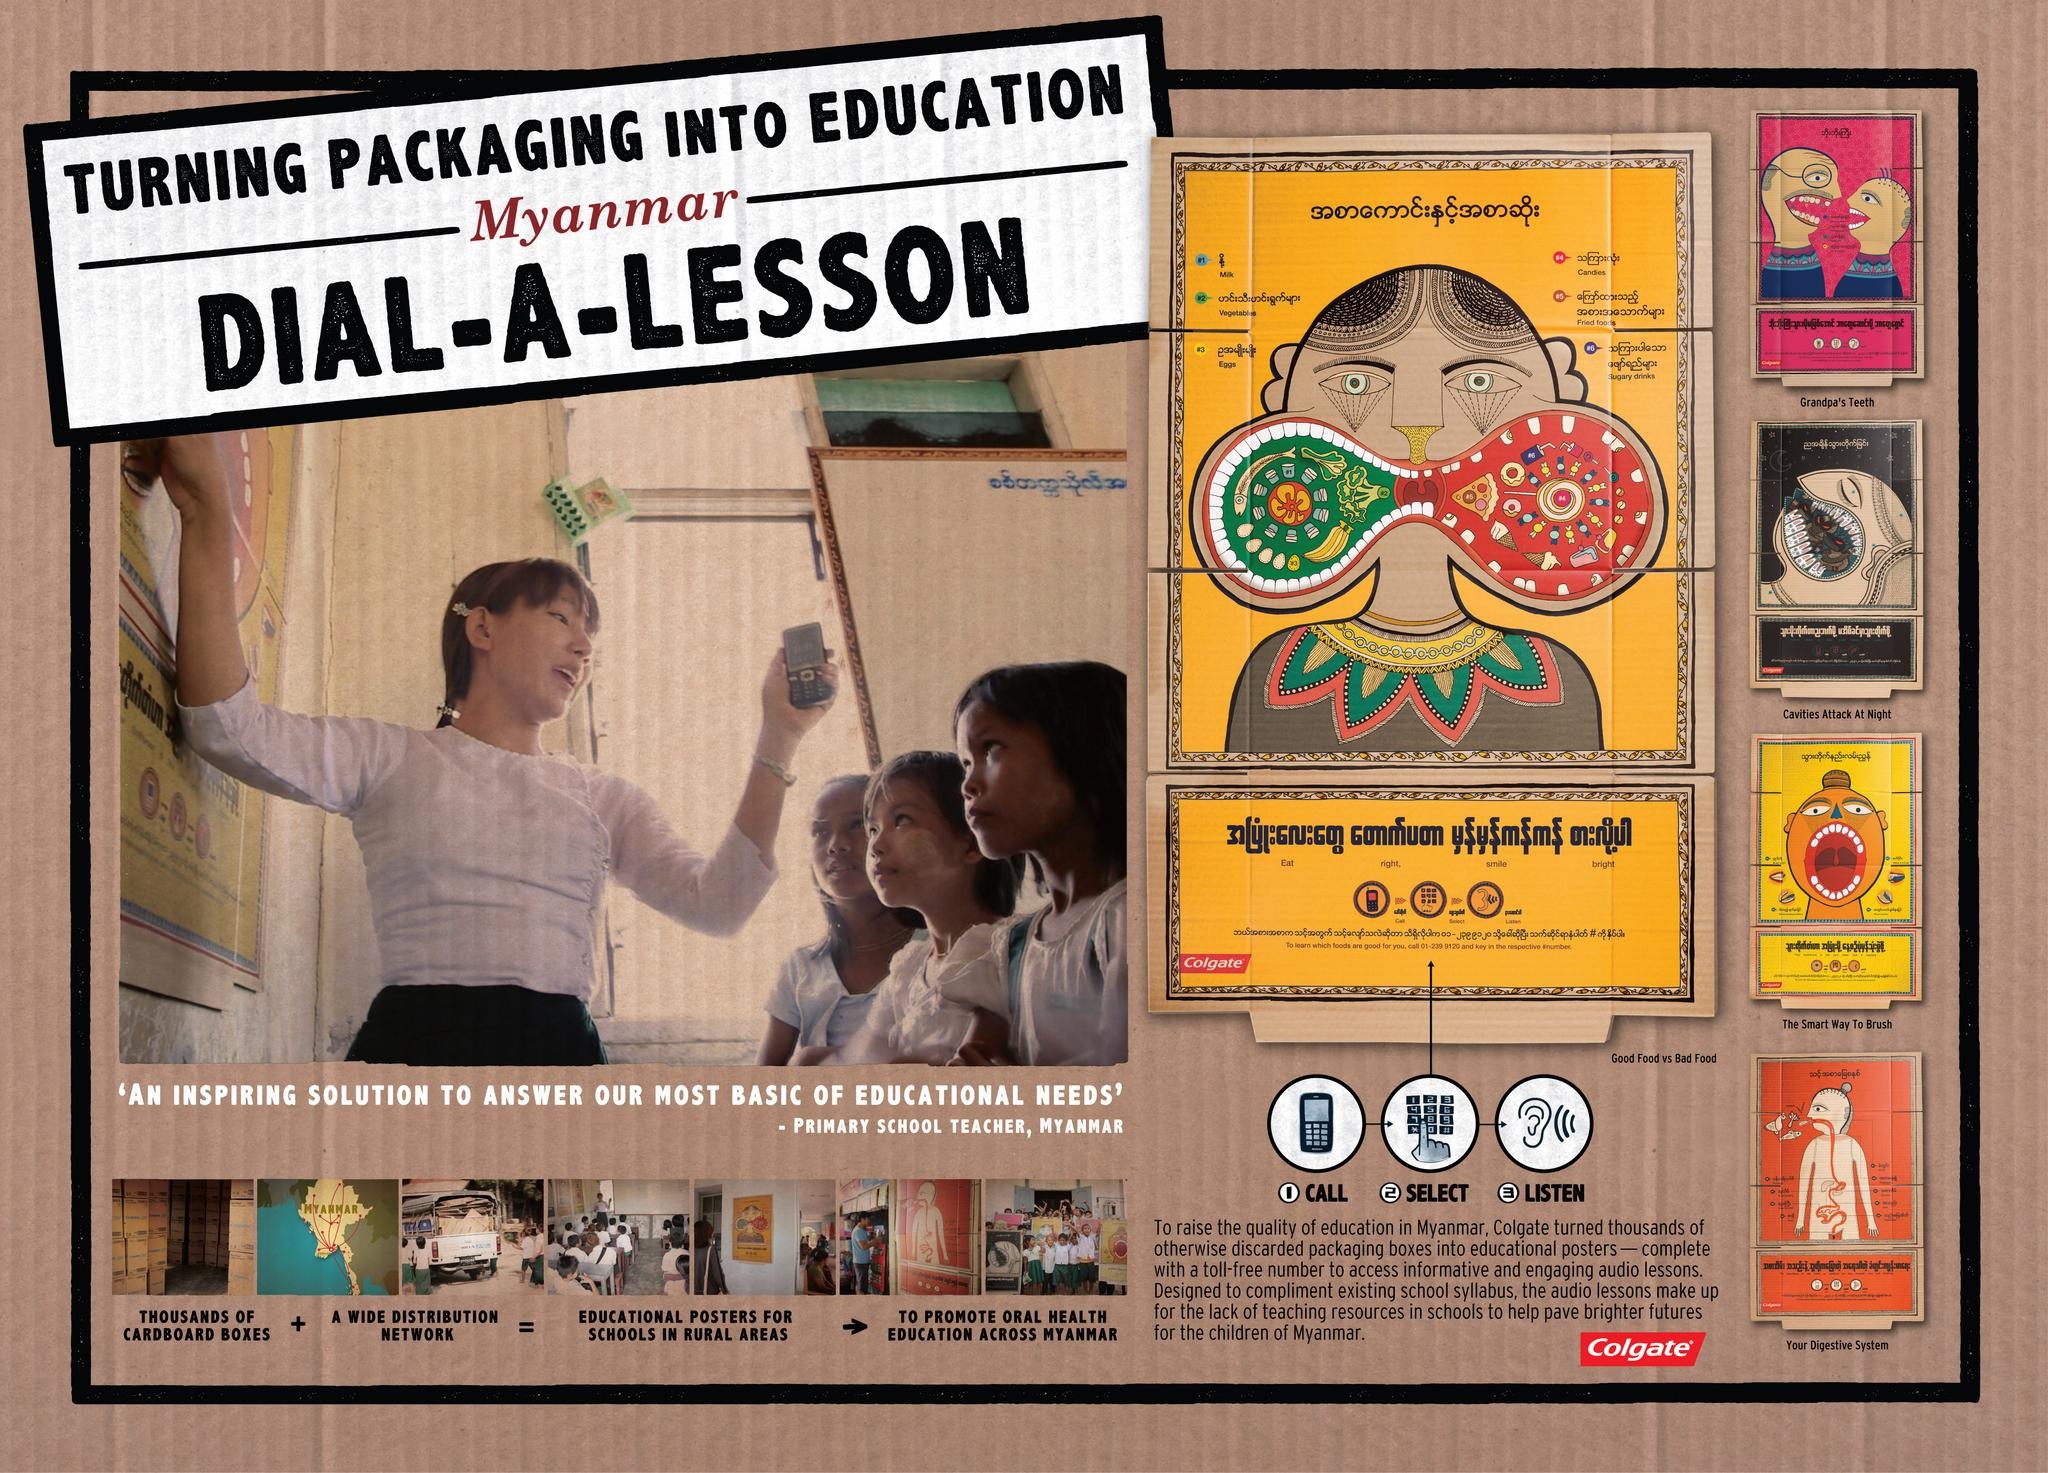 TURNING PACKAGING INTO EDUCATION